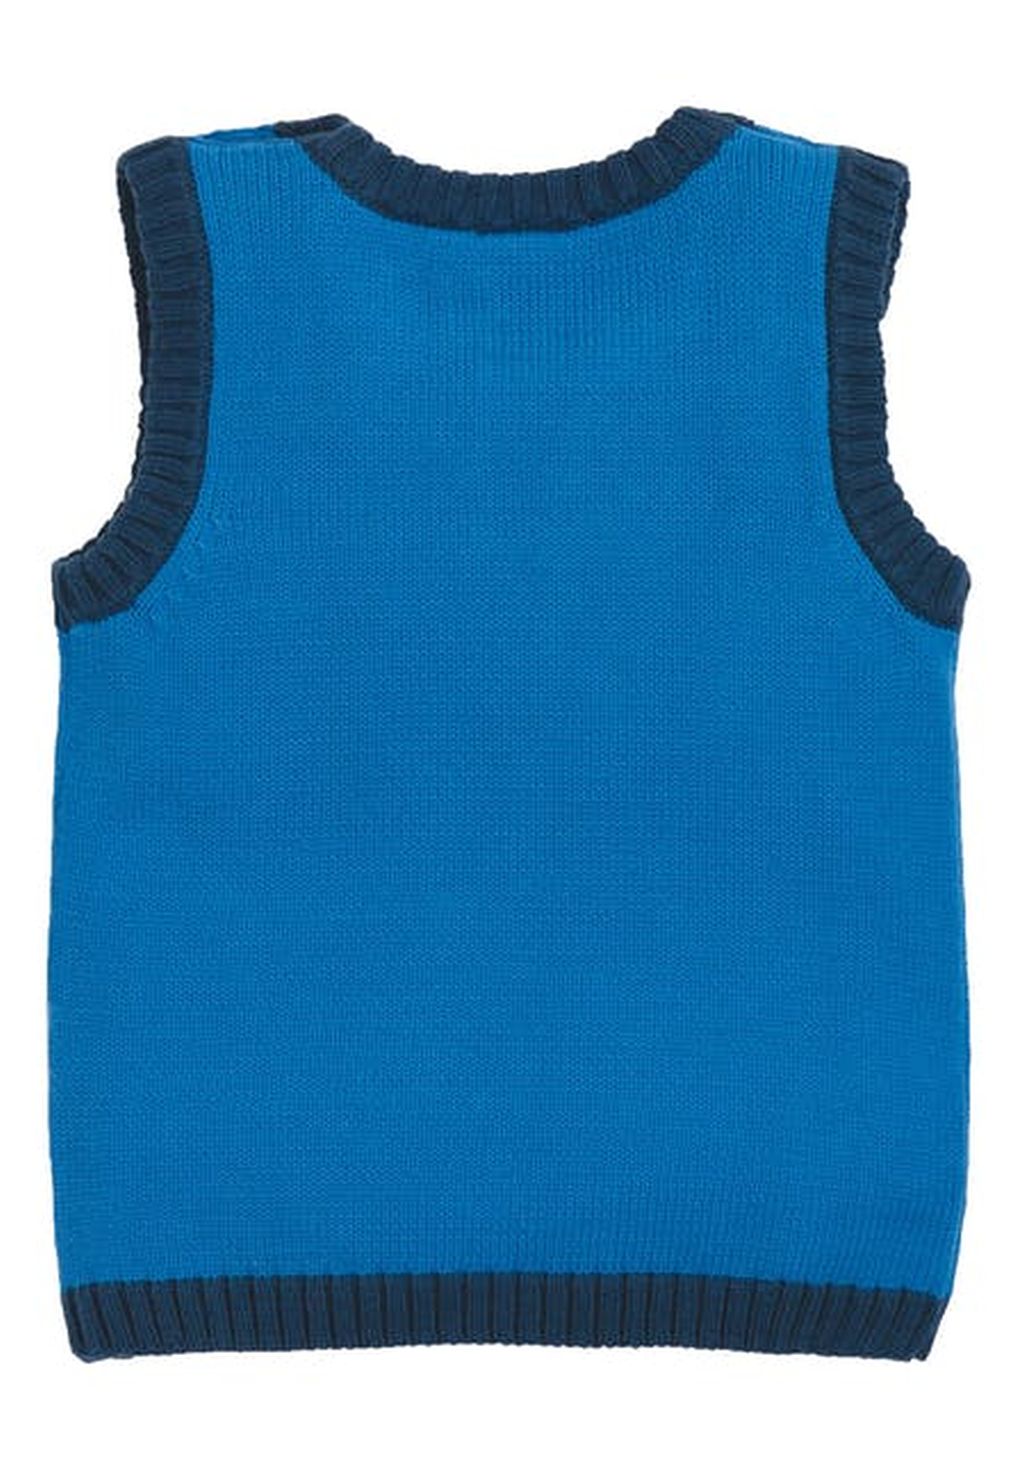 Hank Knitted Tank Top Sail Blue/Penguin 86/92